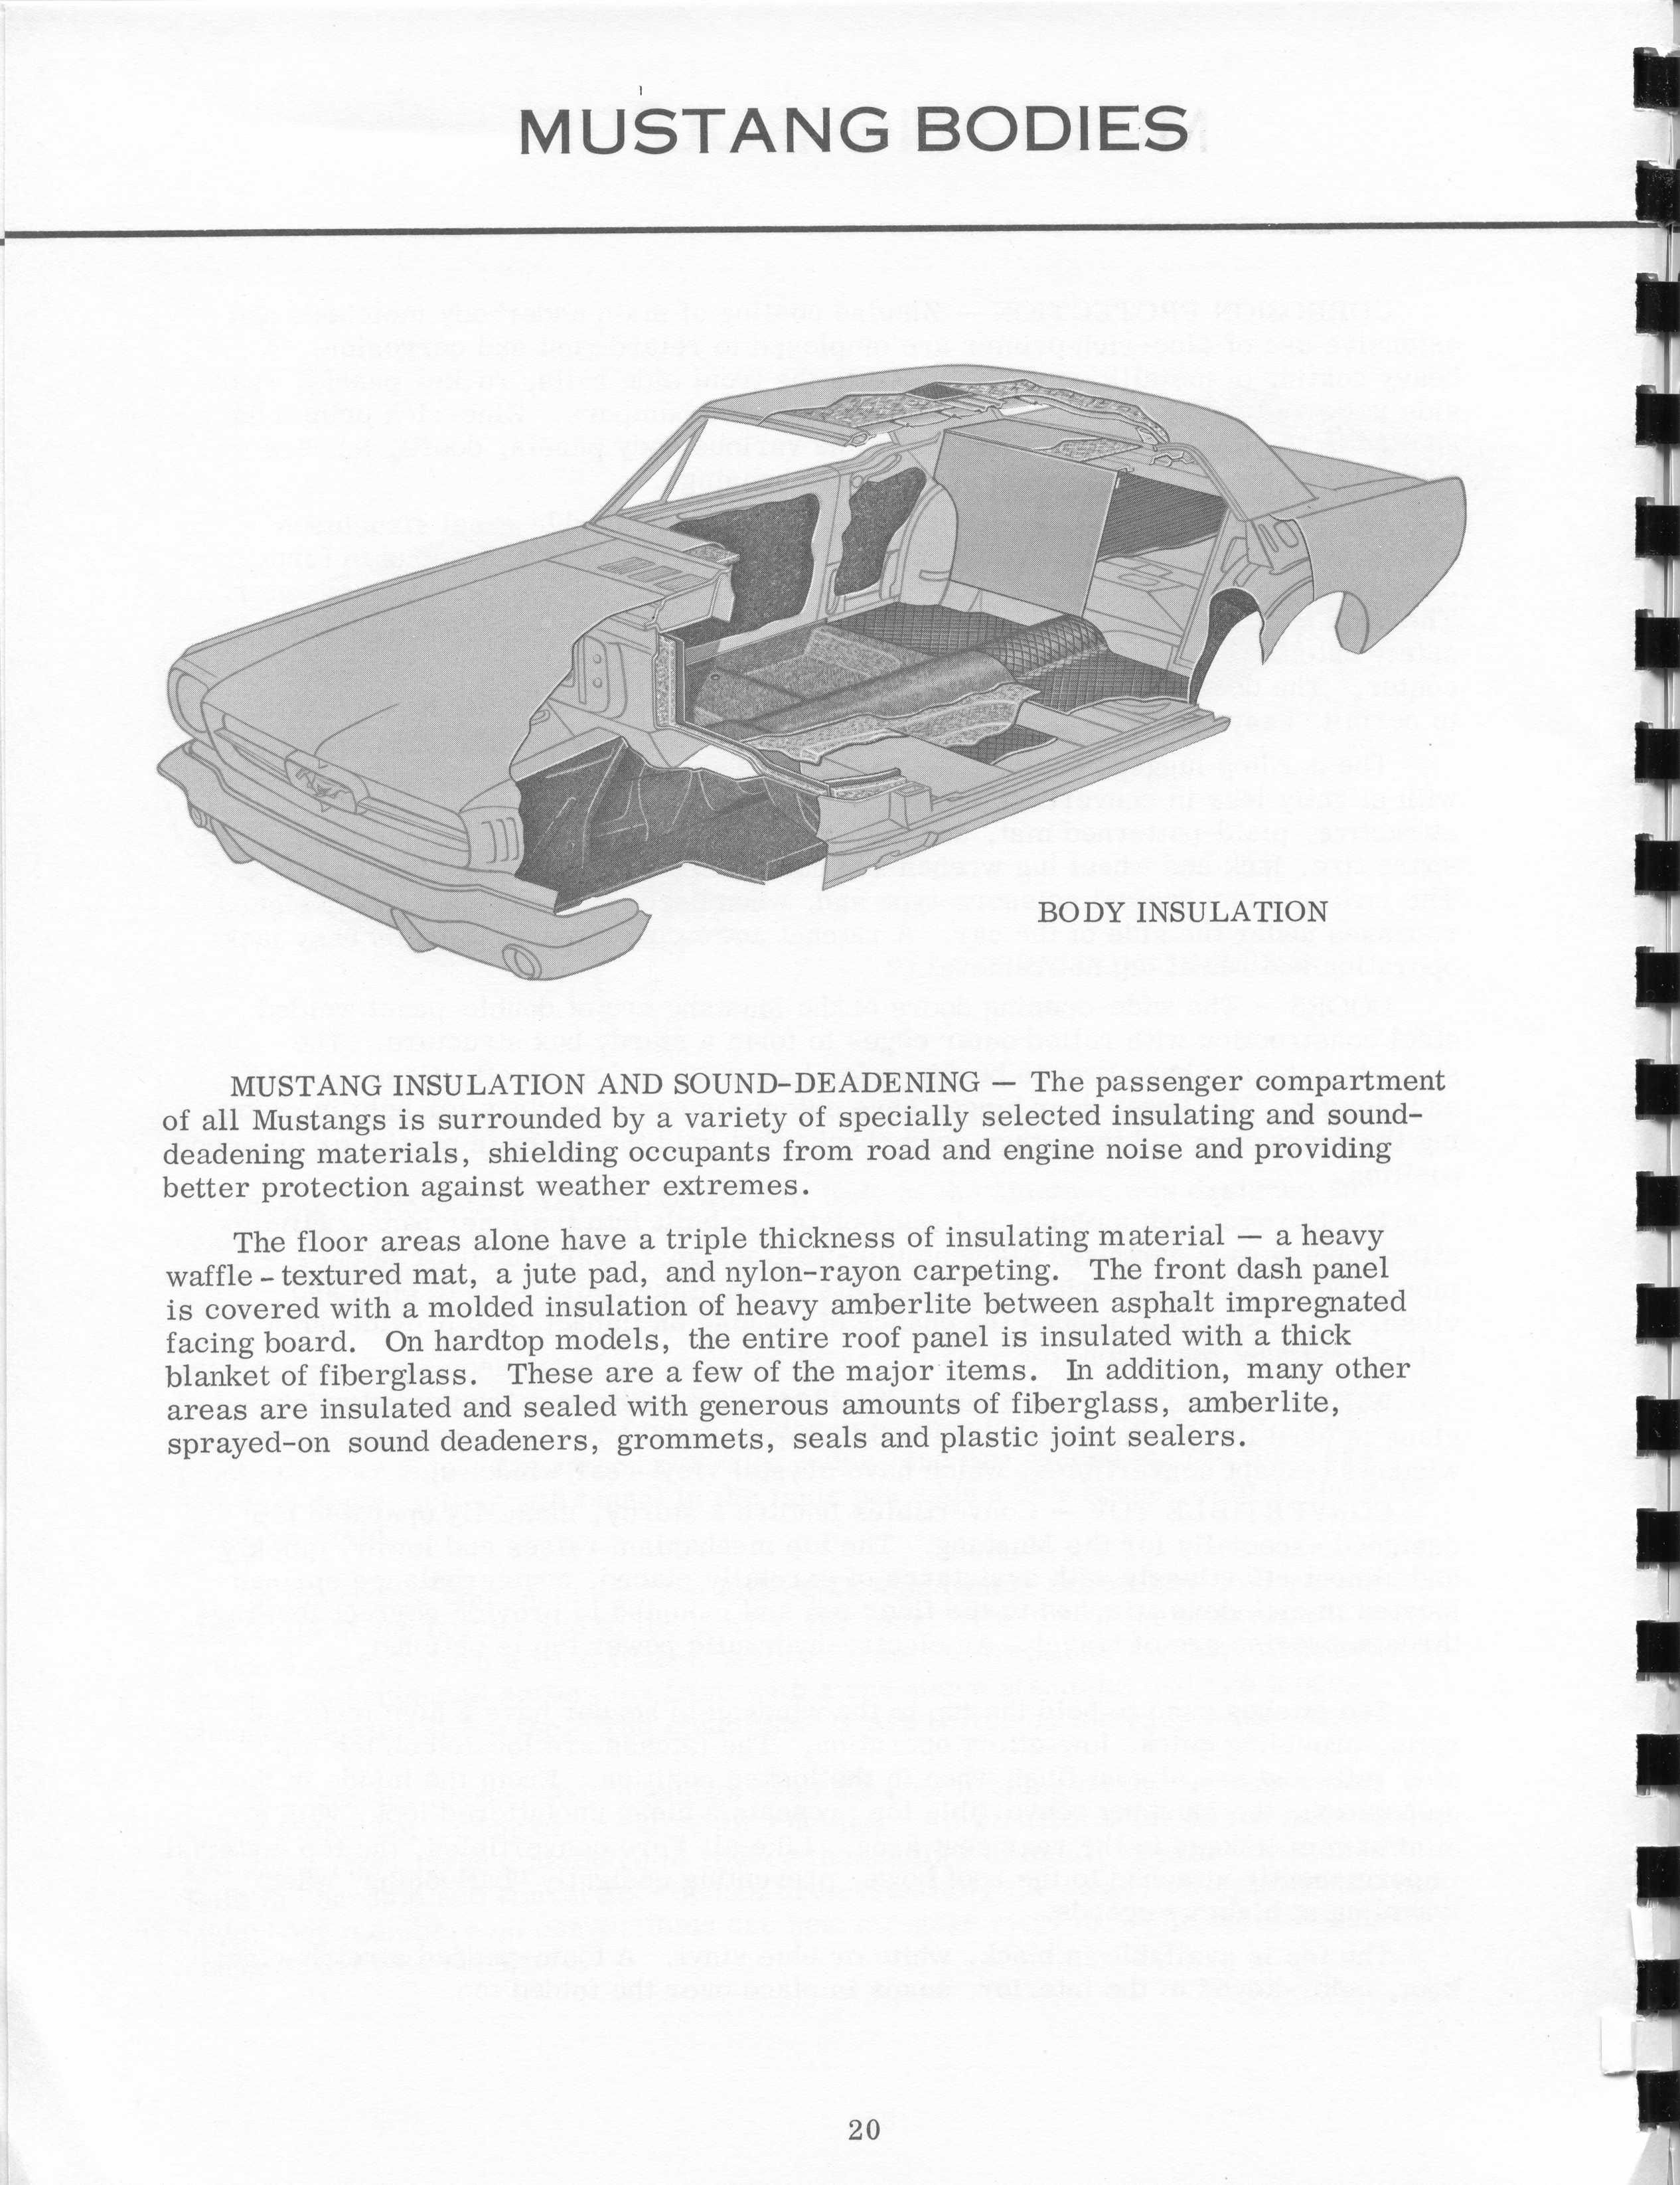 1964_Ford_Mustang_Press_Packet-20